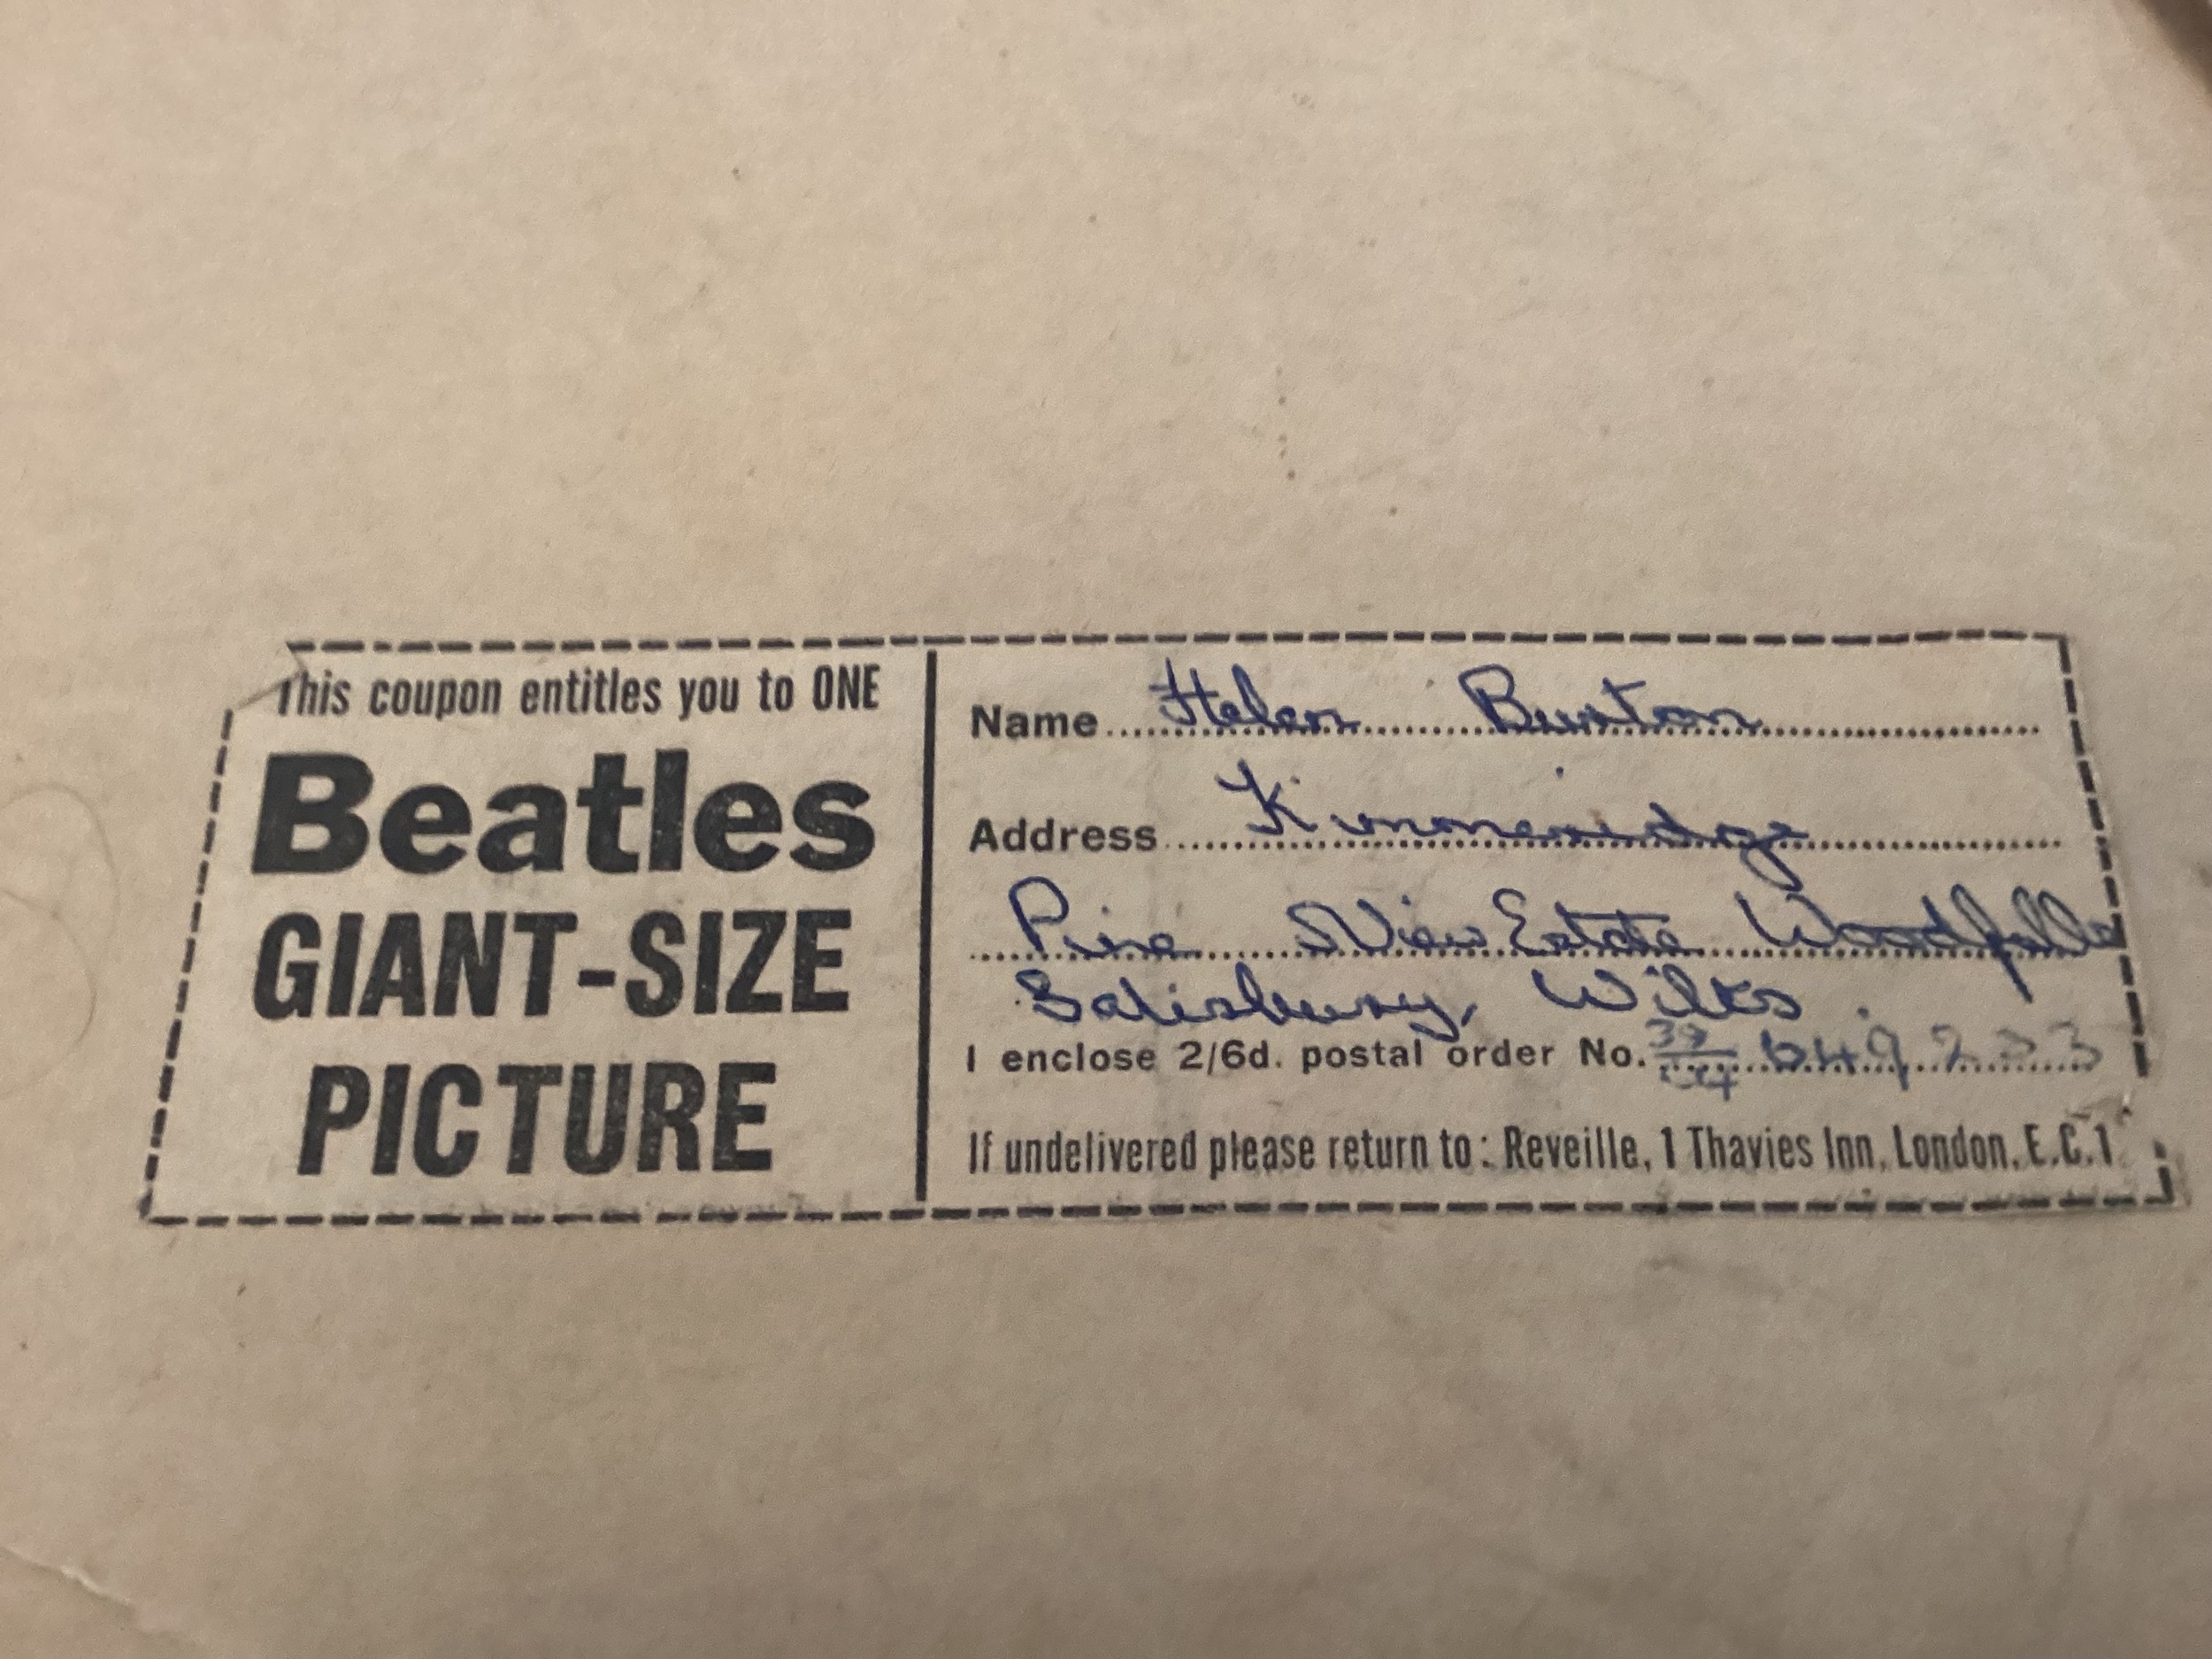 COLLECTION OF EPHEMERA FROM THE BEATLES. Nice collection of various items in print from The Beatles. - Image 8 of 9